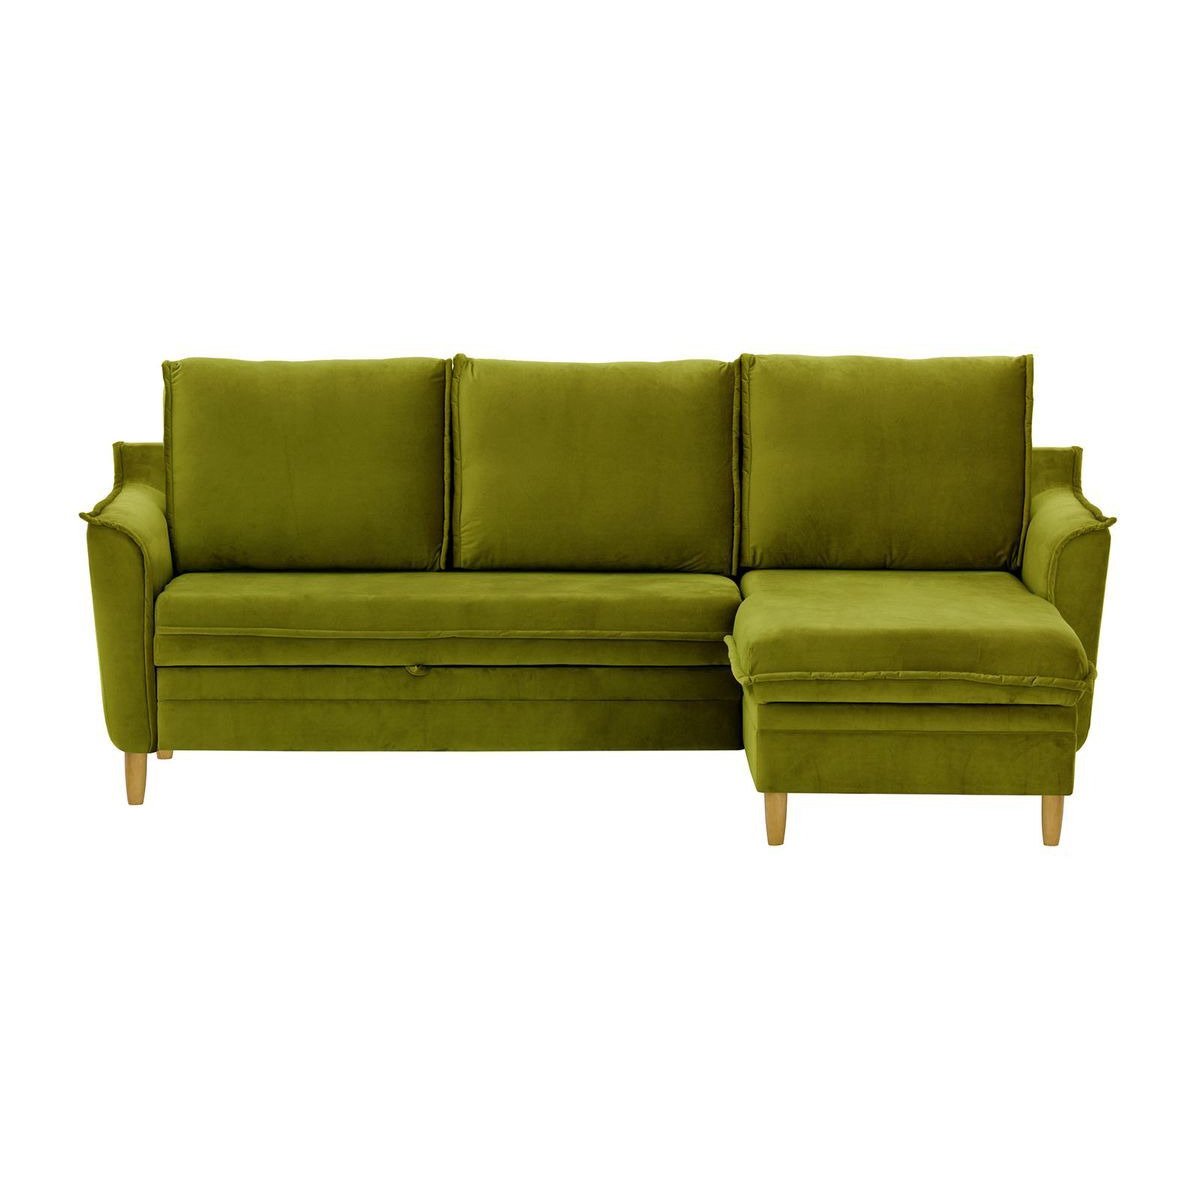 Amour Corner Sofa Bed With Storage, olive green - image 1